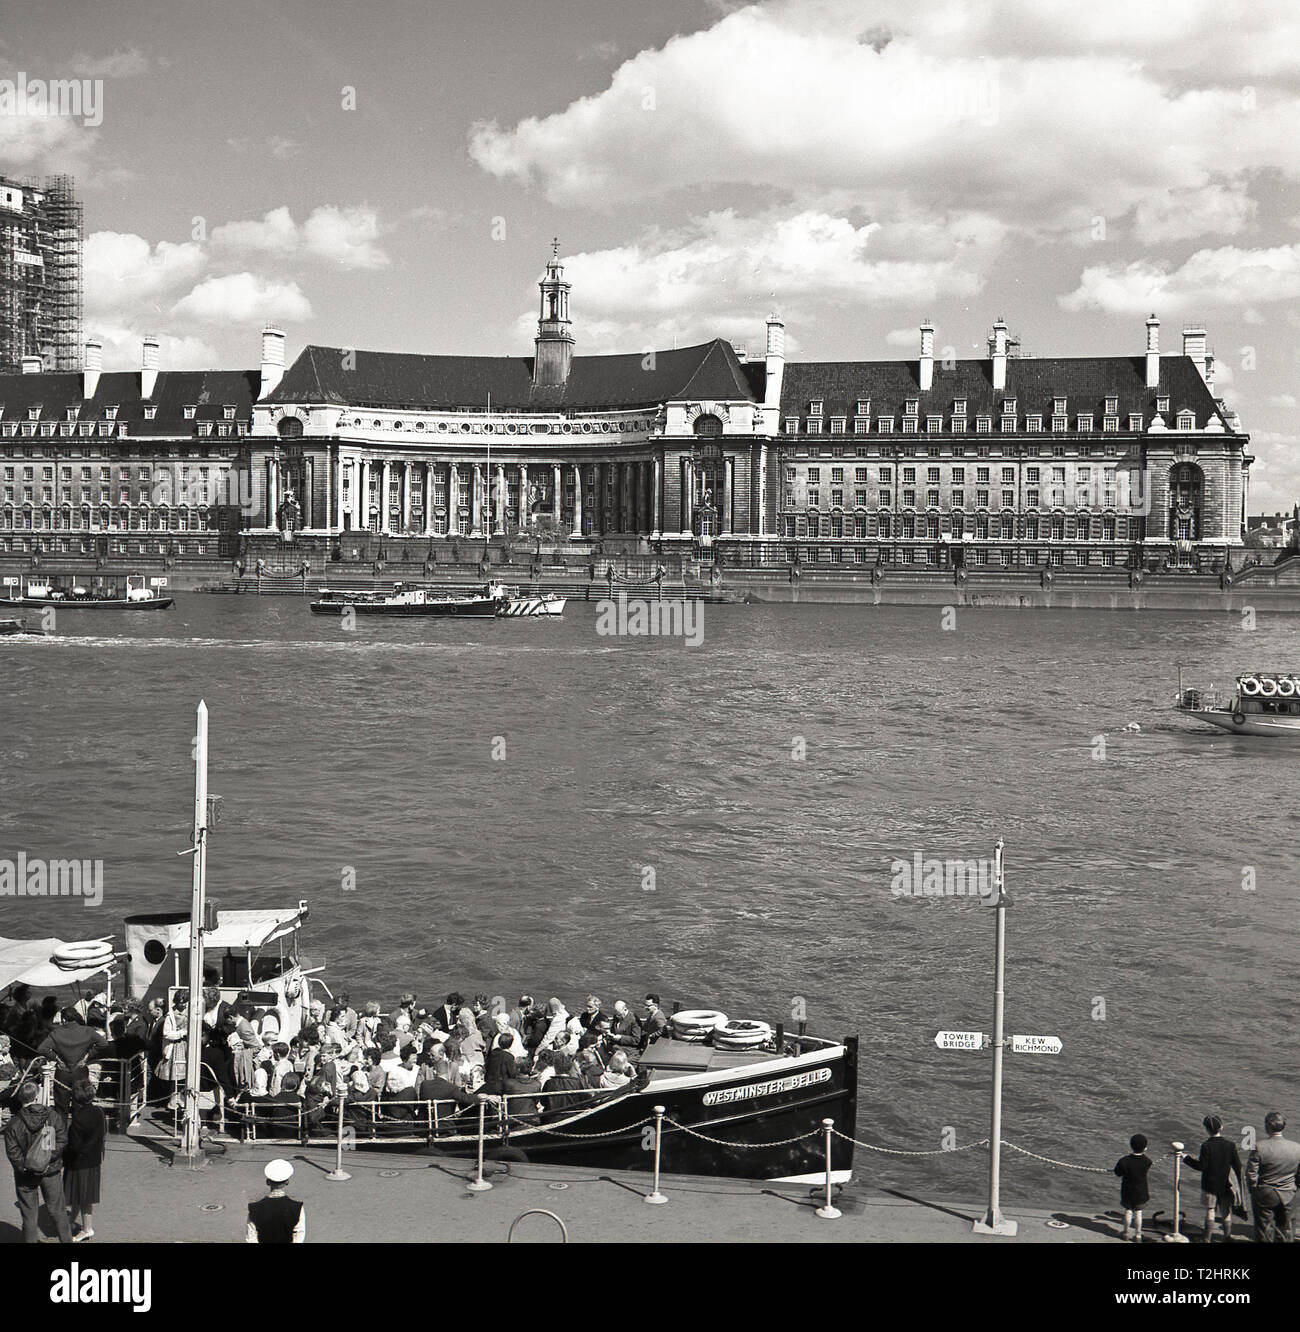 1960s, historical, picture shows Westminster Pier, with people crowded onto a tourist boat, 'Westminster Belle', London, England, UK, with County Hall, former home of the London County Council (LCC) the grand building sitting on the riverbank opposite. Stock Photo